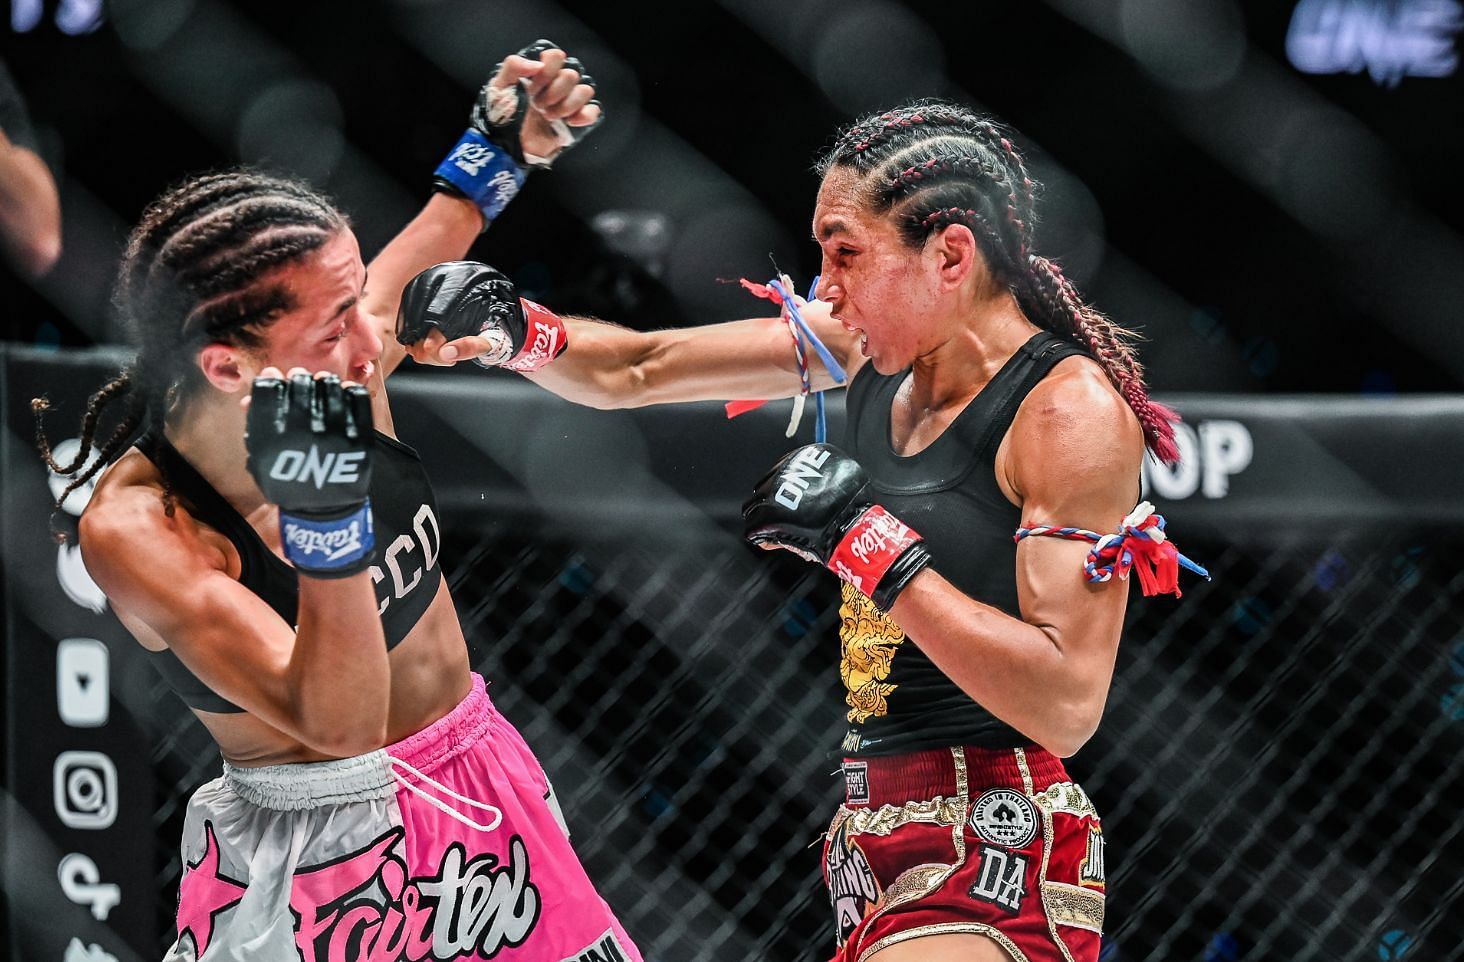 Lara Fernandez (L) had her moments early on against Janet Todd (R). | Photo by ONE Championship